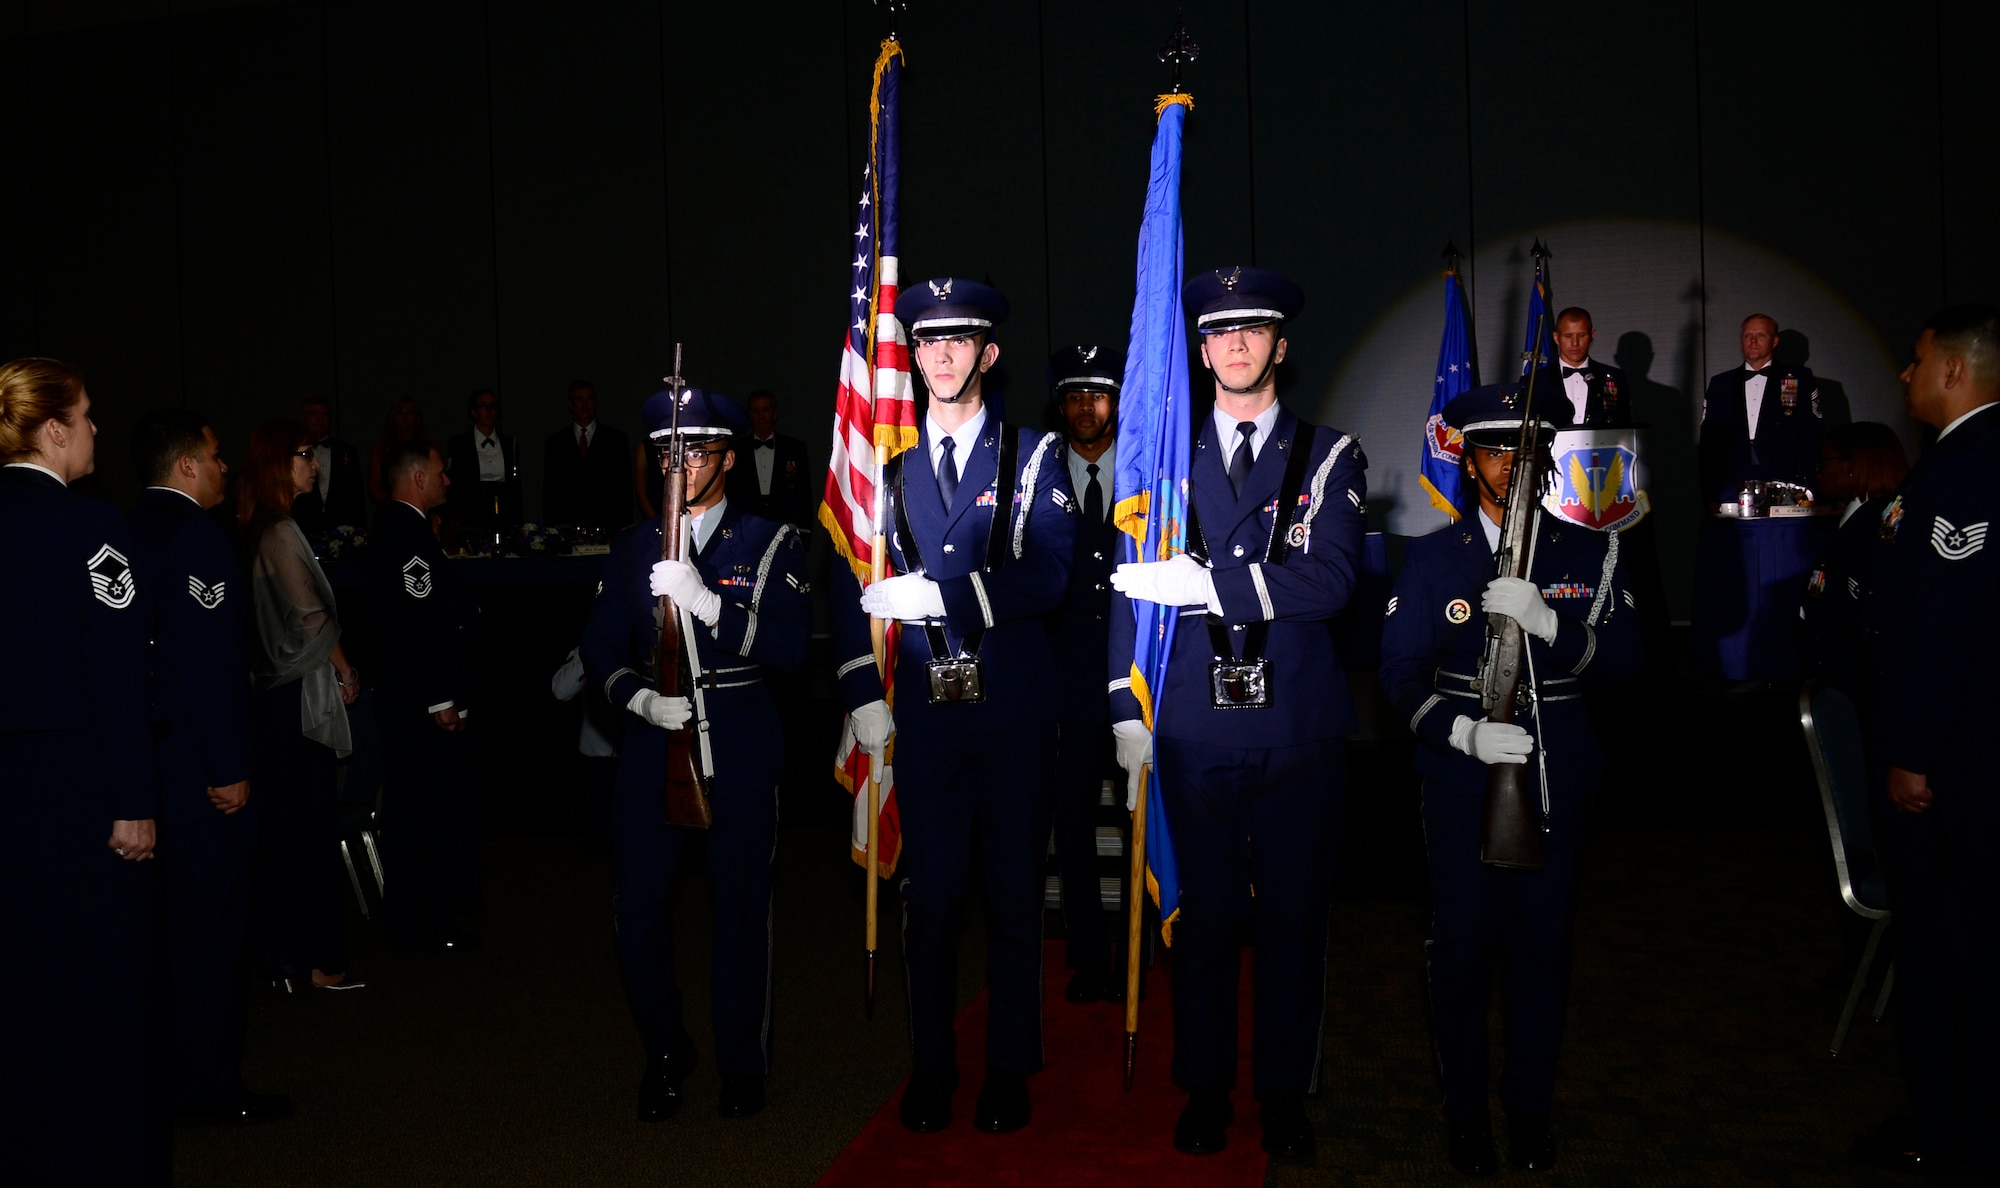 Airmen from the 633rd Air Base Wing Honor Guard present the colors during an Order of the Sword presentation ceremony at the Hampton Roads Convention Center in Hampton, Va., Oct. 27, 2016. The Order of the Sword is the highest honor and tribute enlisted Airmen can bestow upon a commissioned officer. It is patterned after two orders of chivalry founded during the Middle Ages in Europe and still in existence today - the Royal Order of the Sword and the Swedish Military Order of the Sword. (U.S. Air Force photo by Airman 1st Class Kaylee Dubois)